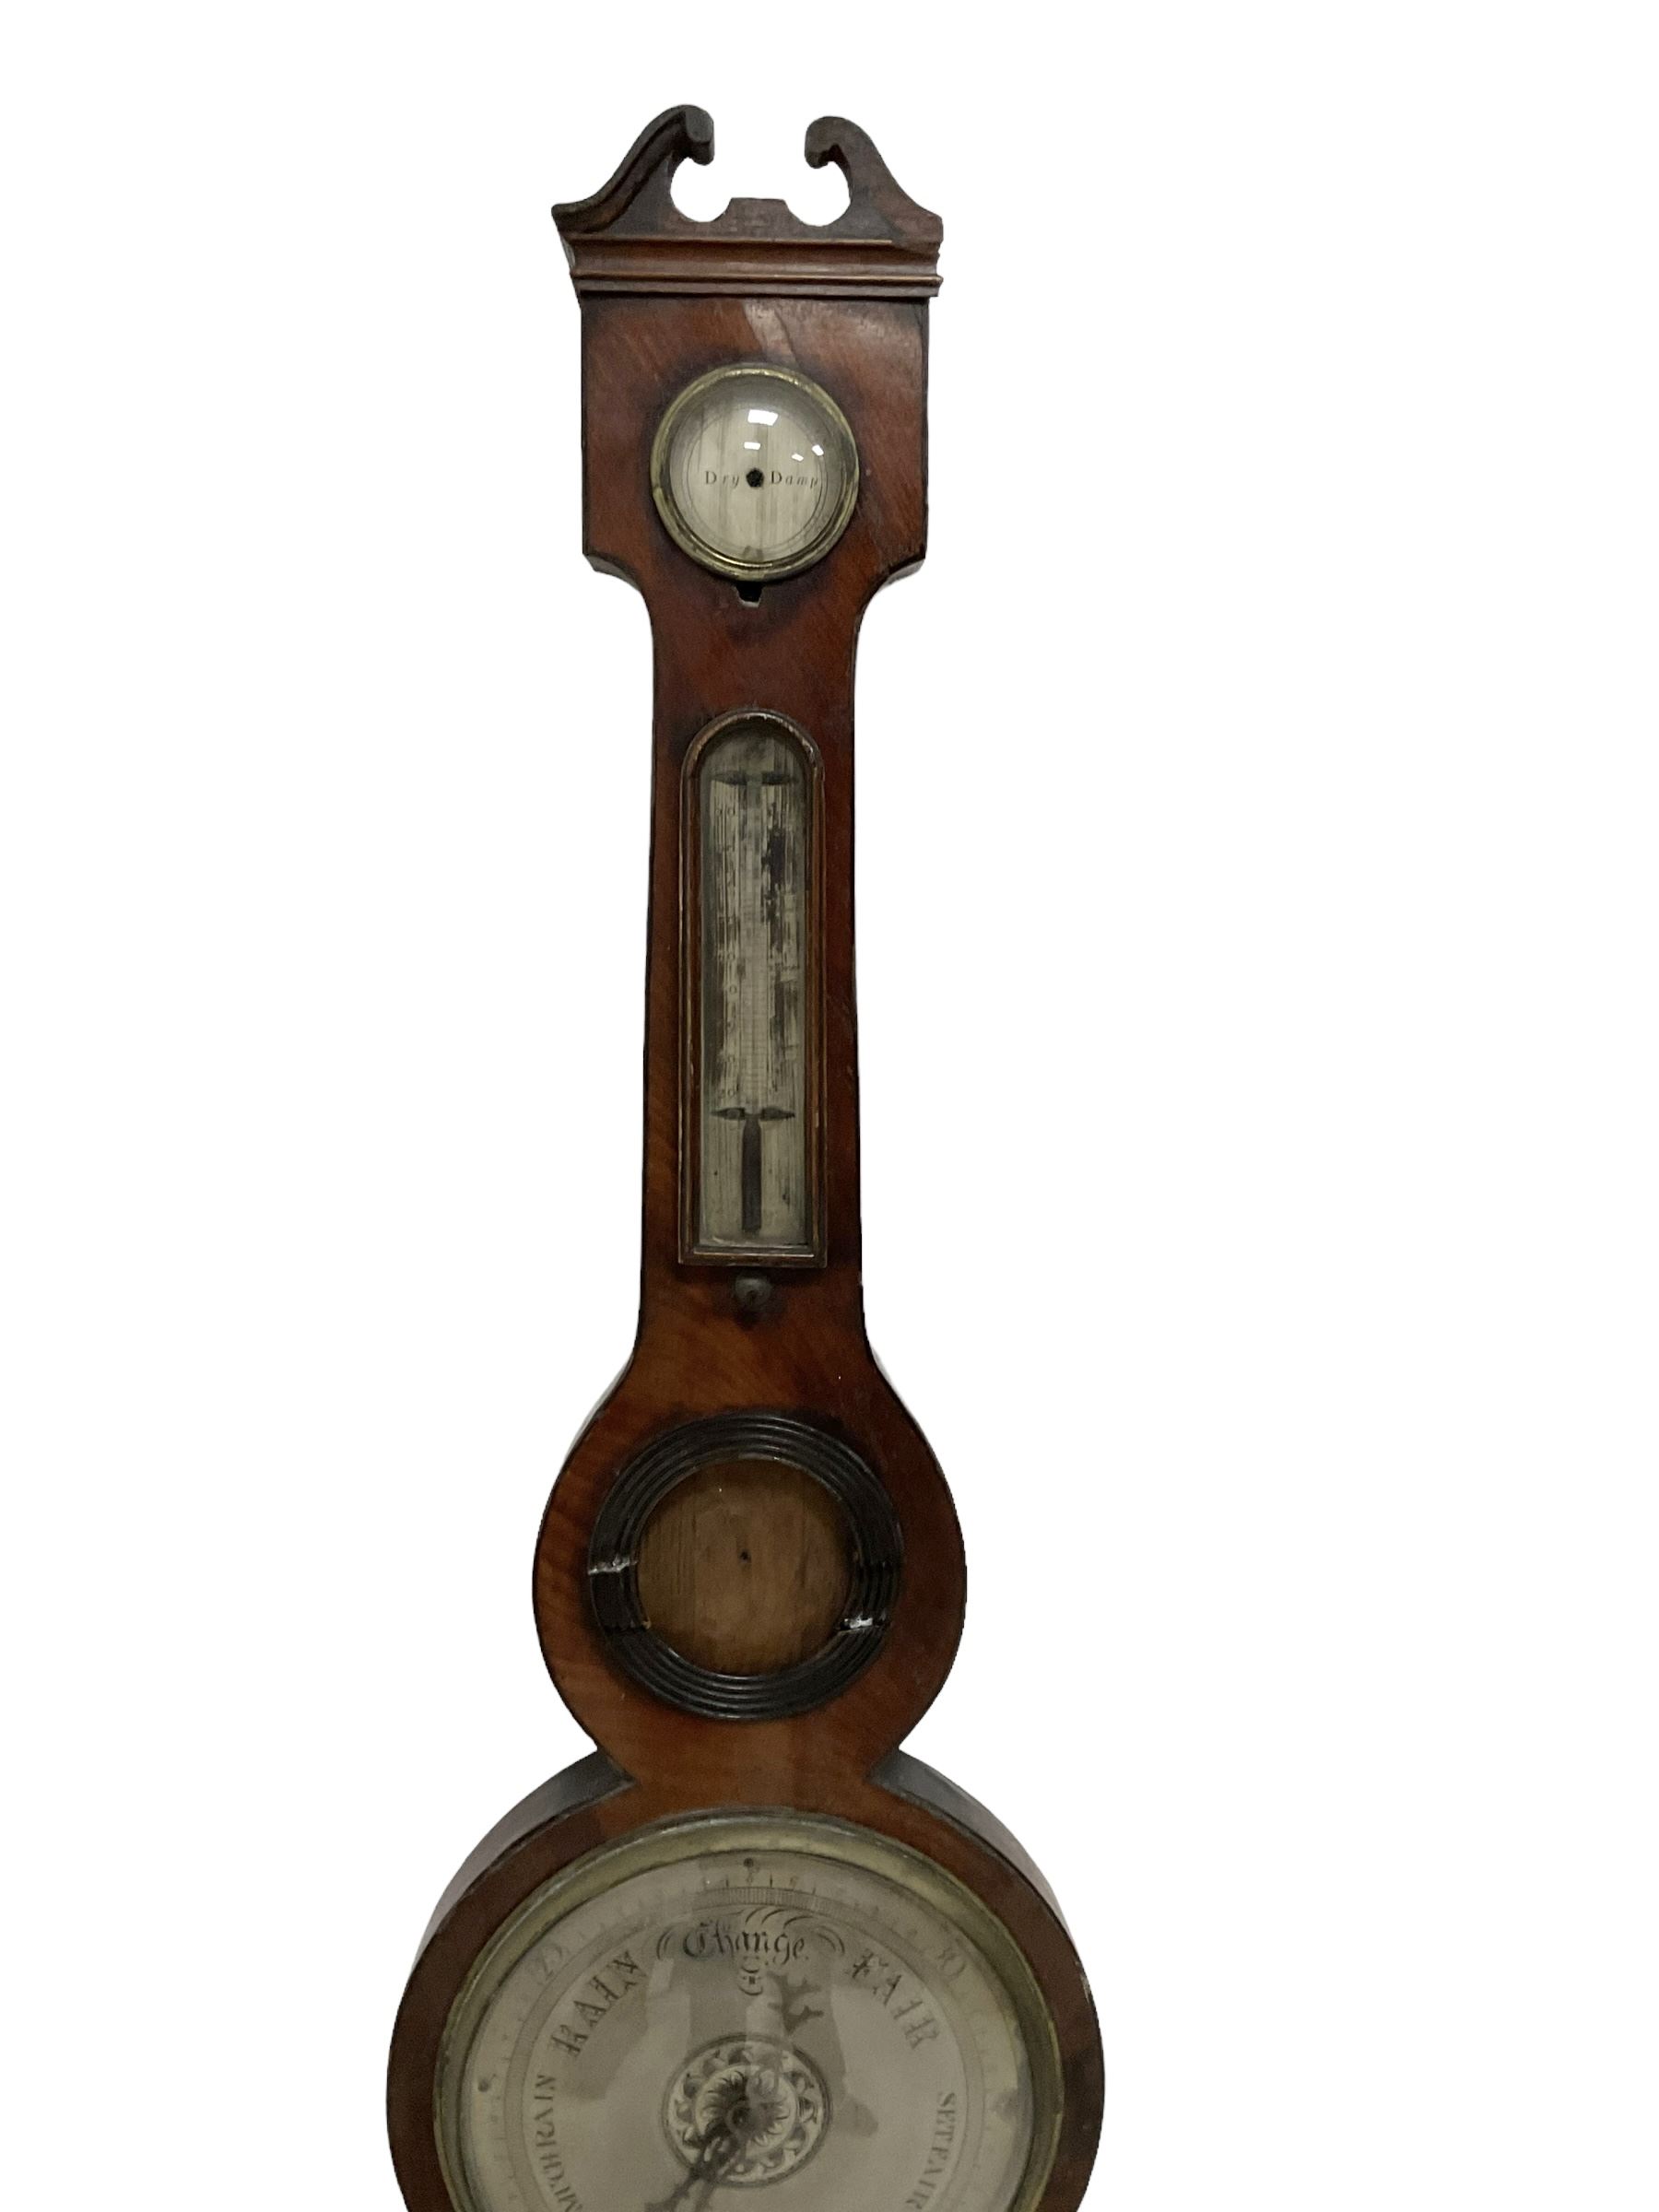 Victorian mercury barometer in a mahogany case - Image 3 of 3